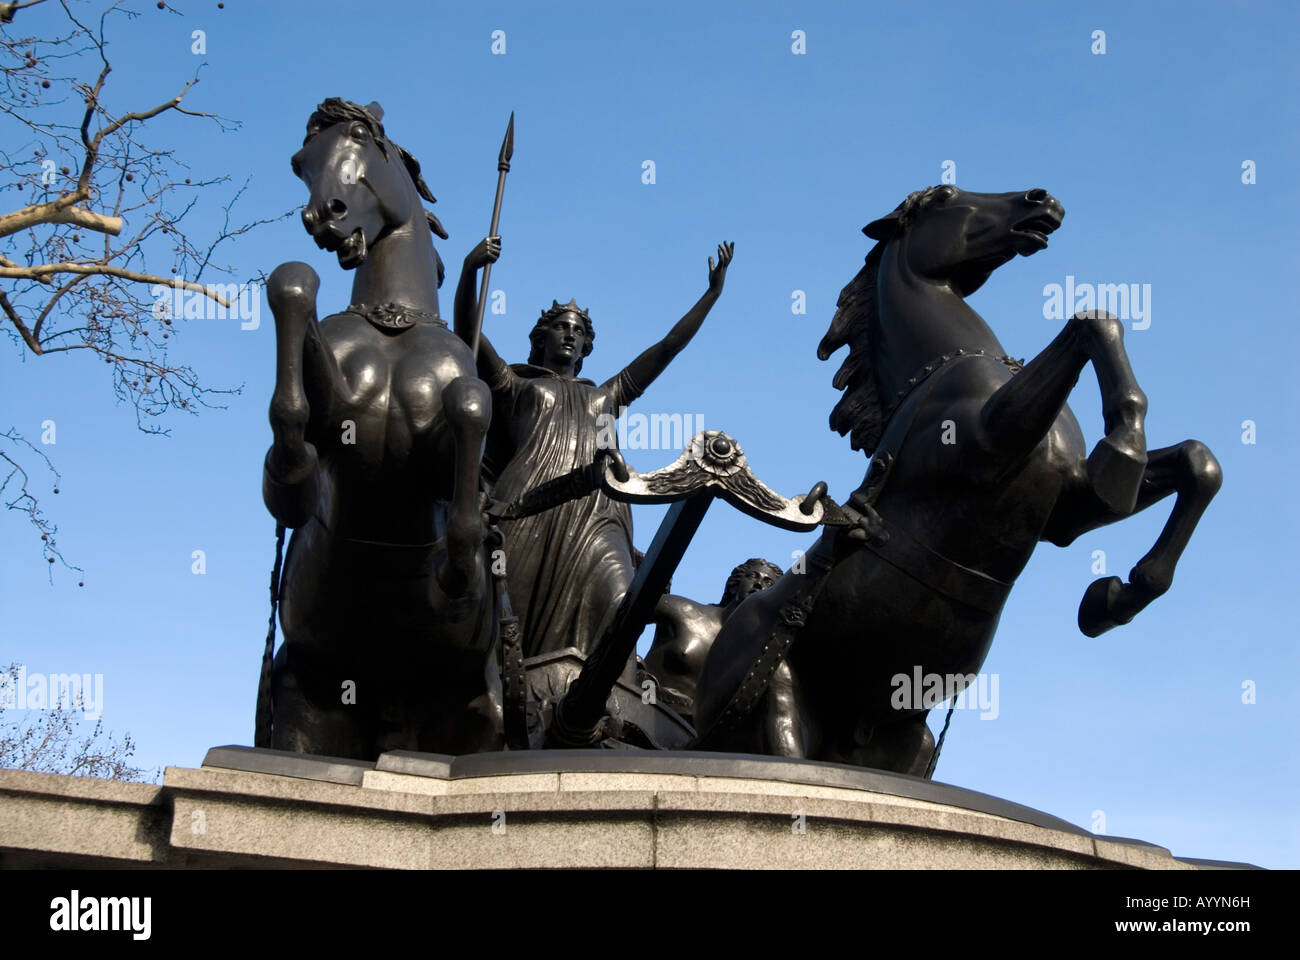 Statue of Boudica on her chariot near Westminster Pier London England UK Stock Photo